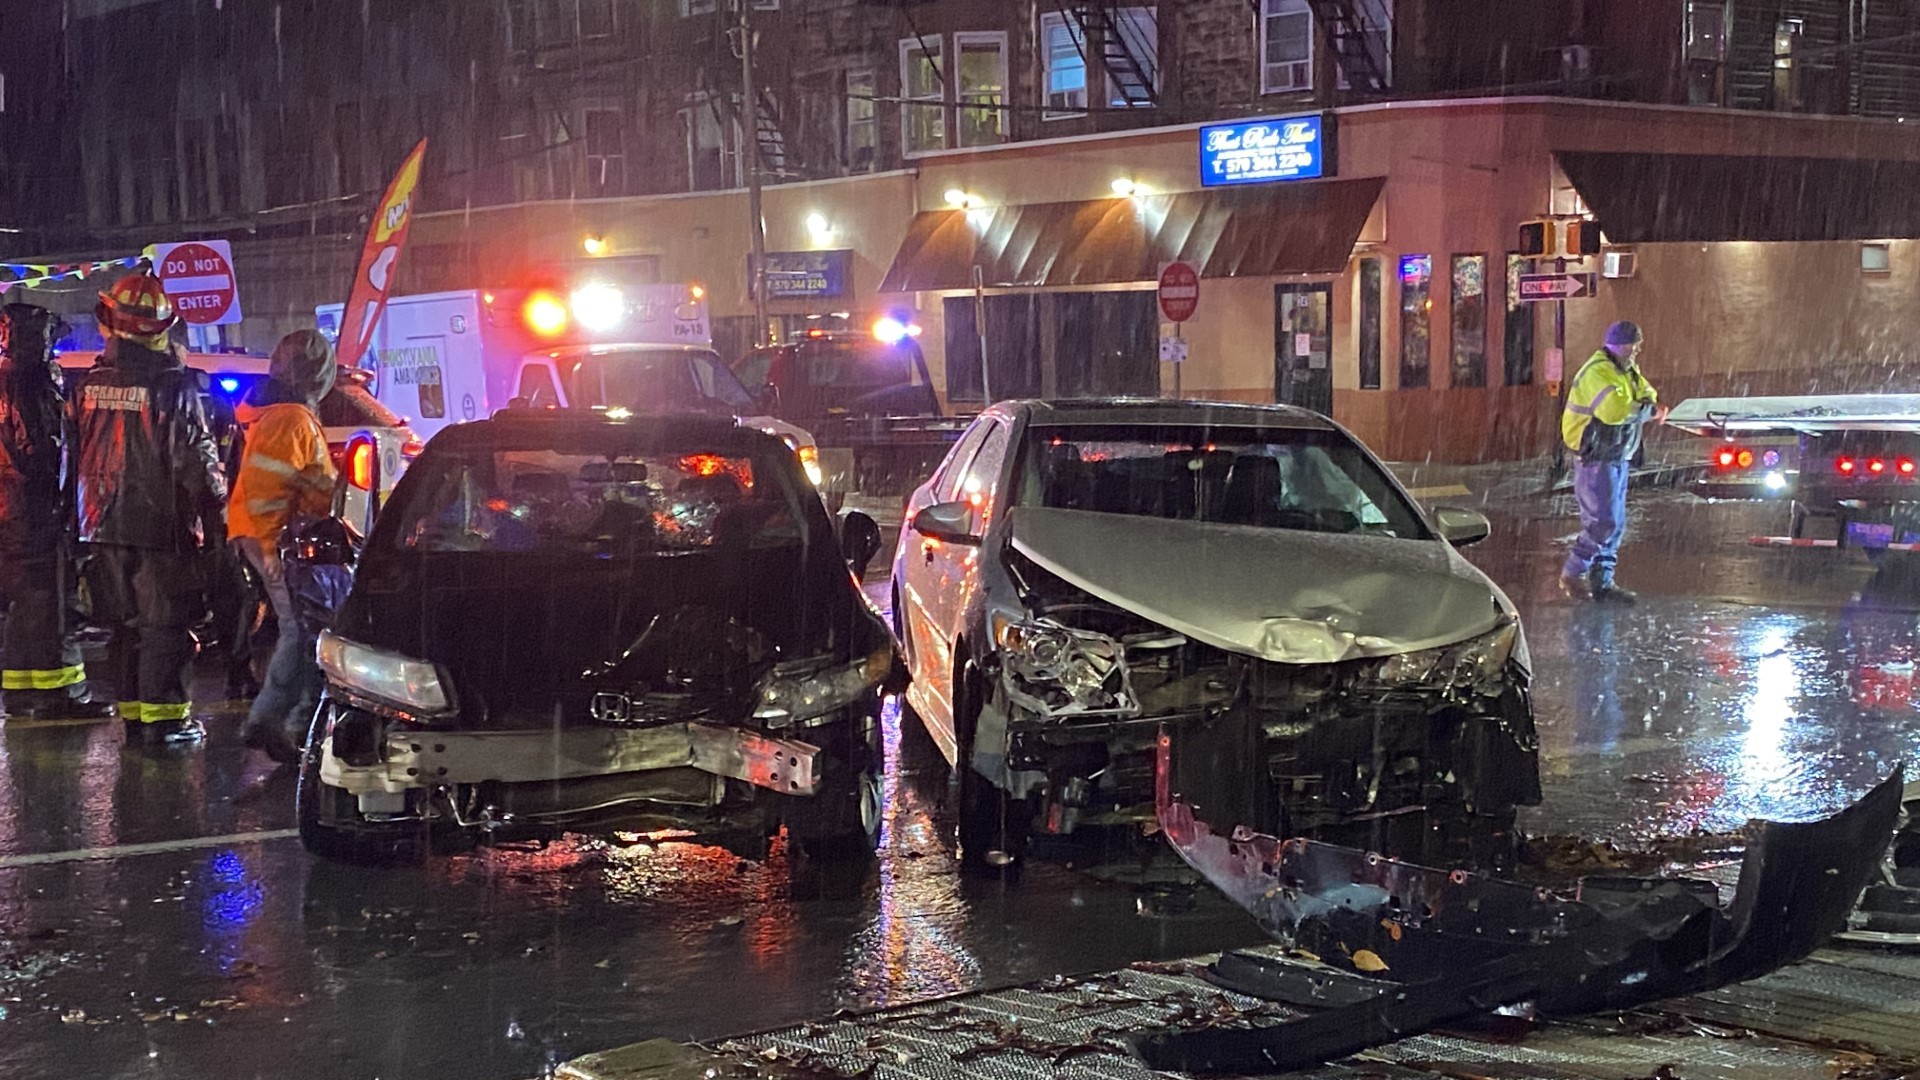 The crash happened around 8:30 p.m. on Mulberry and Adams Avenue in the city.